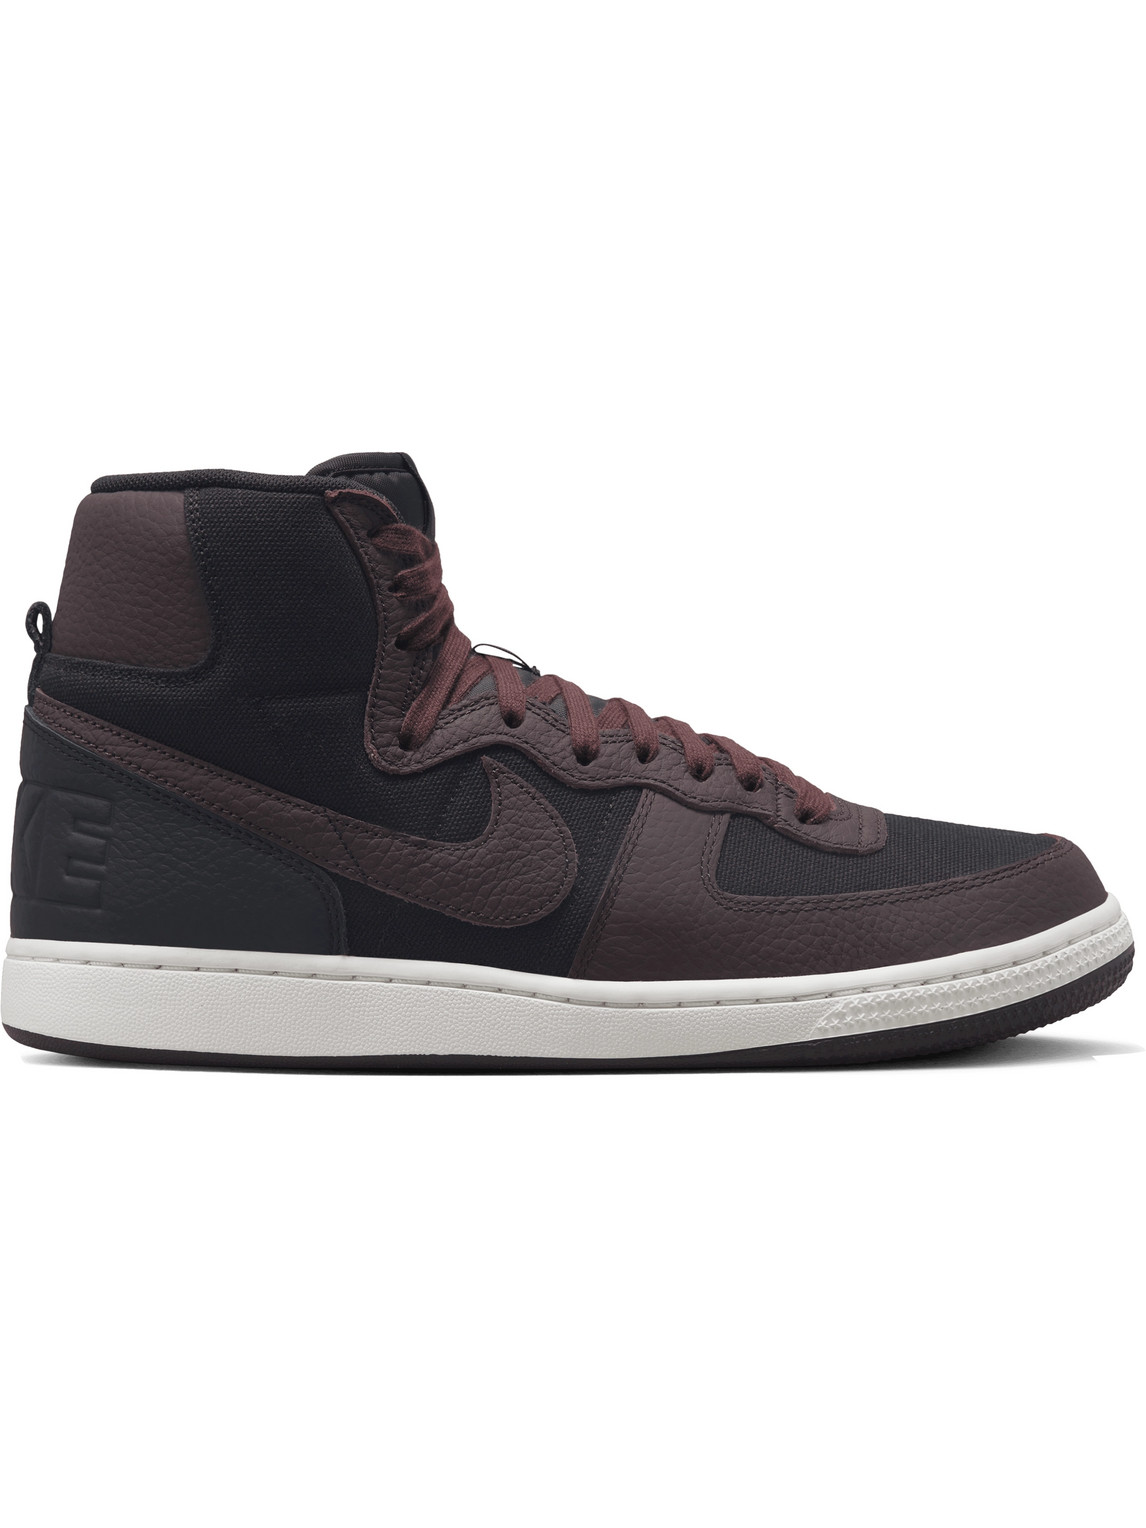 Terminator Leather-Trimmed Canvas High-Top Sneakers